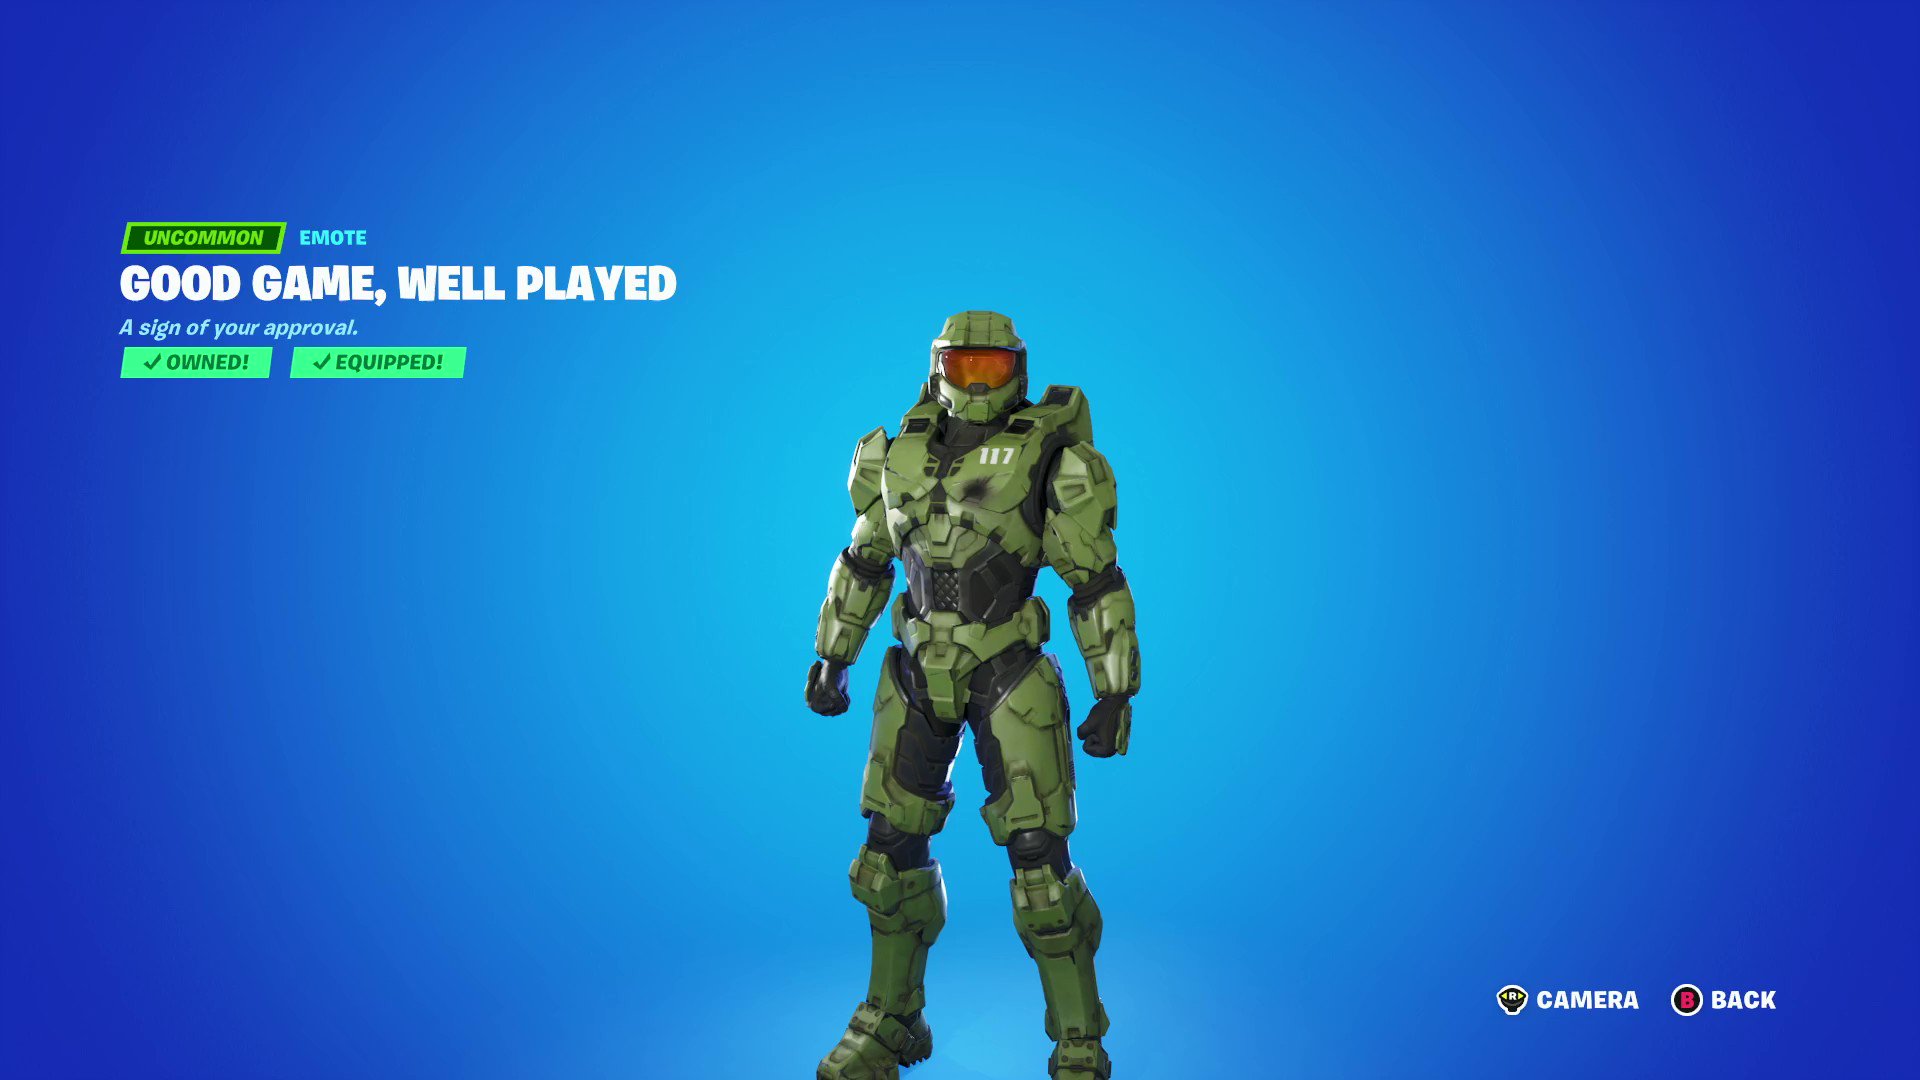 Steve Saylor on X: When everybody plays we all win. #GAAD @FortniteGame  Alt video: Master Chief in Fortnite showing a new GAAD themed emote using  ASL to sign for Good Game Well